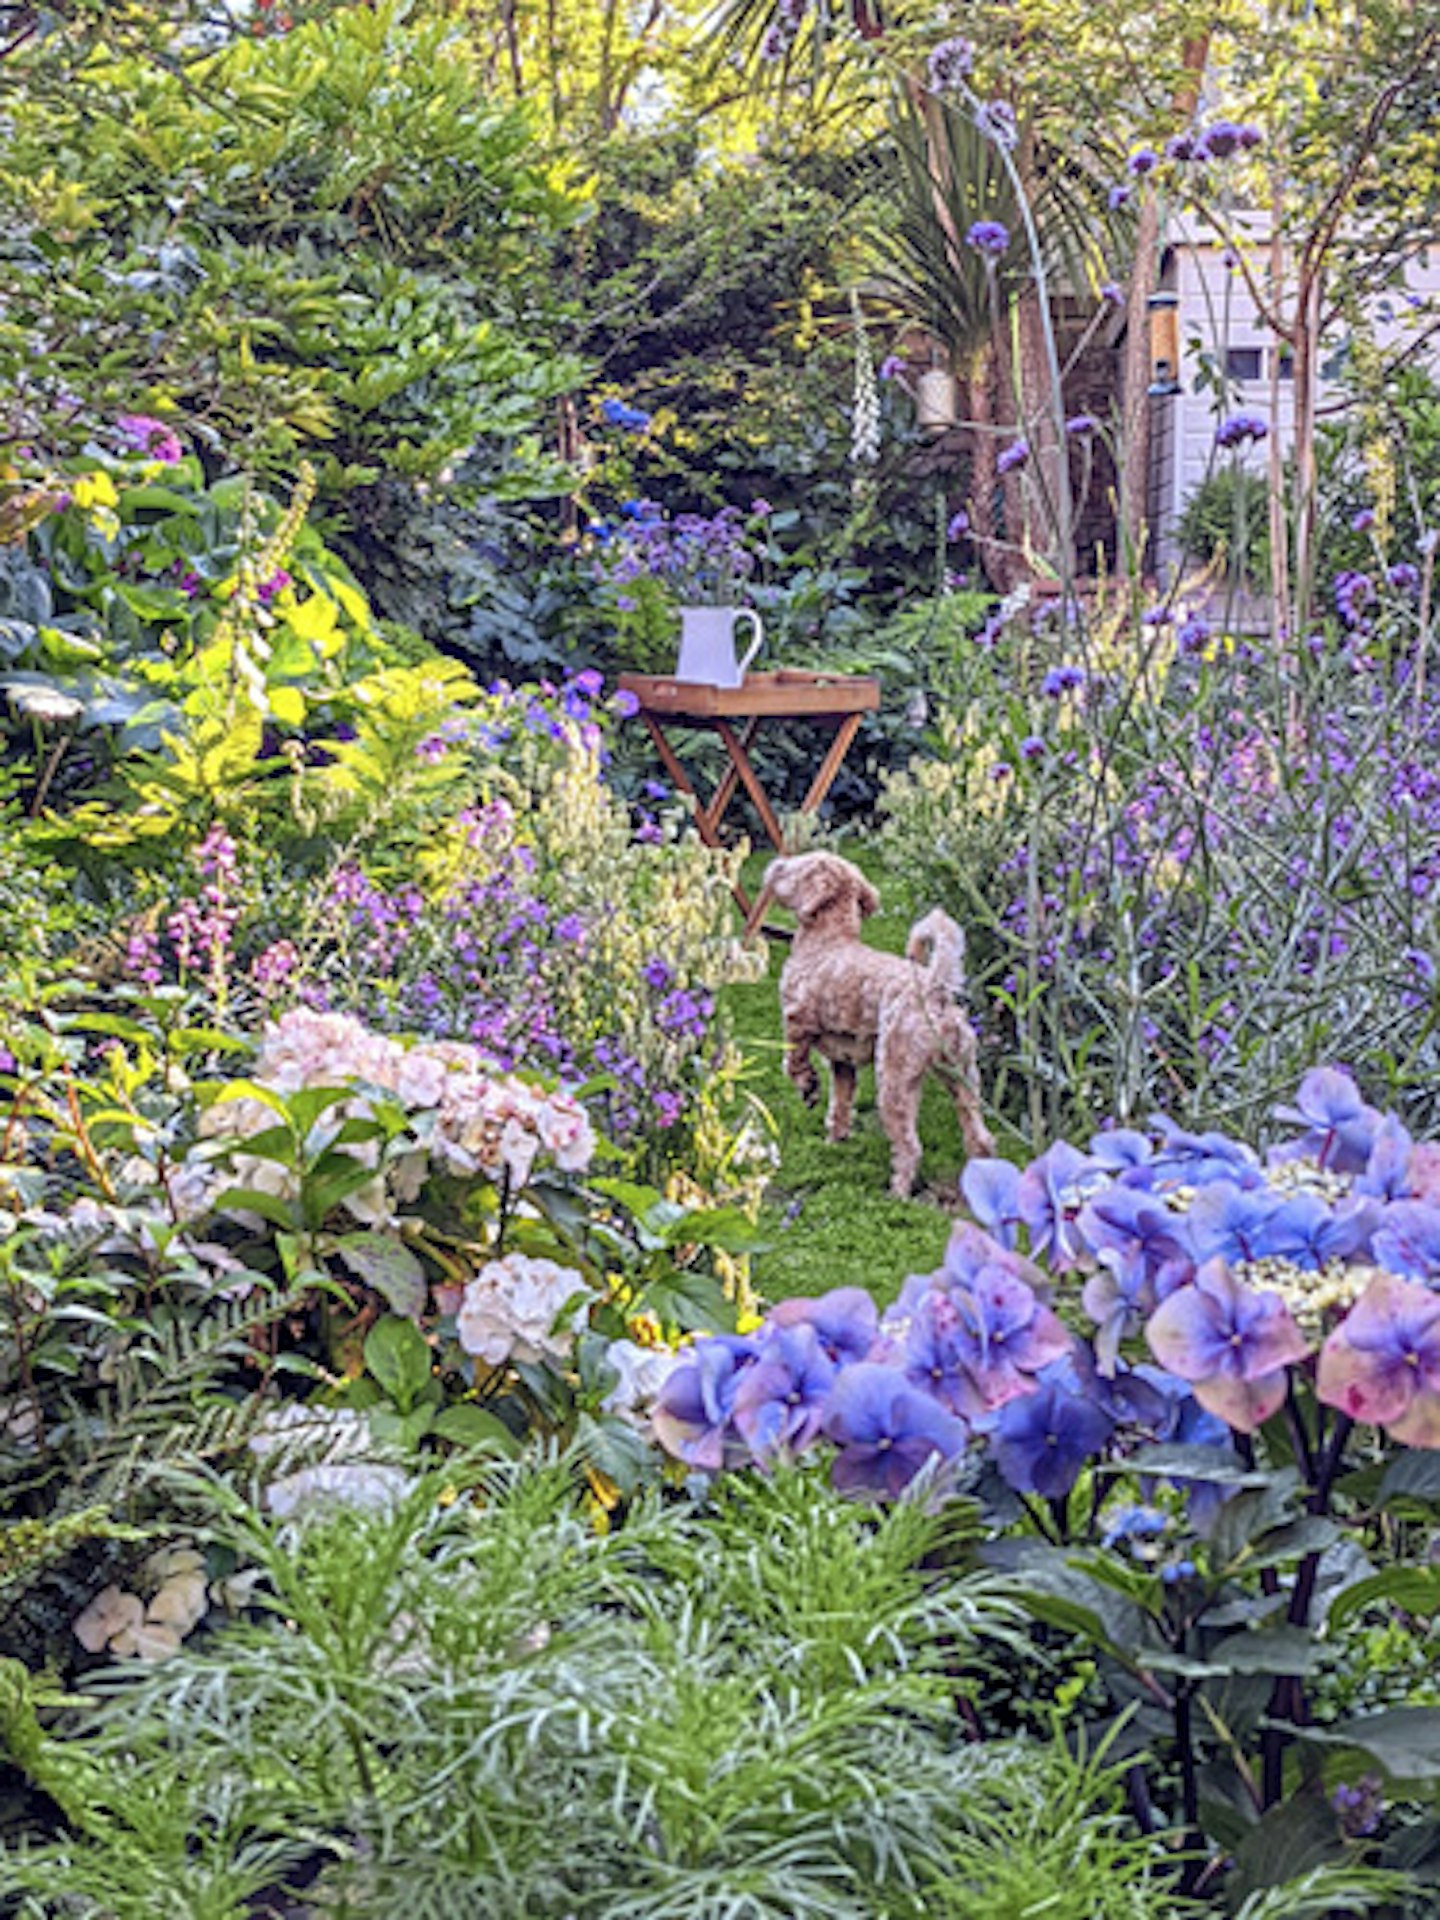 A colourful garden with lots of purple flowers and a dog